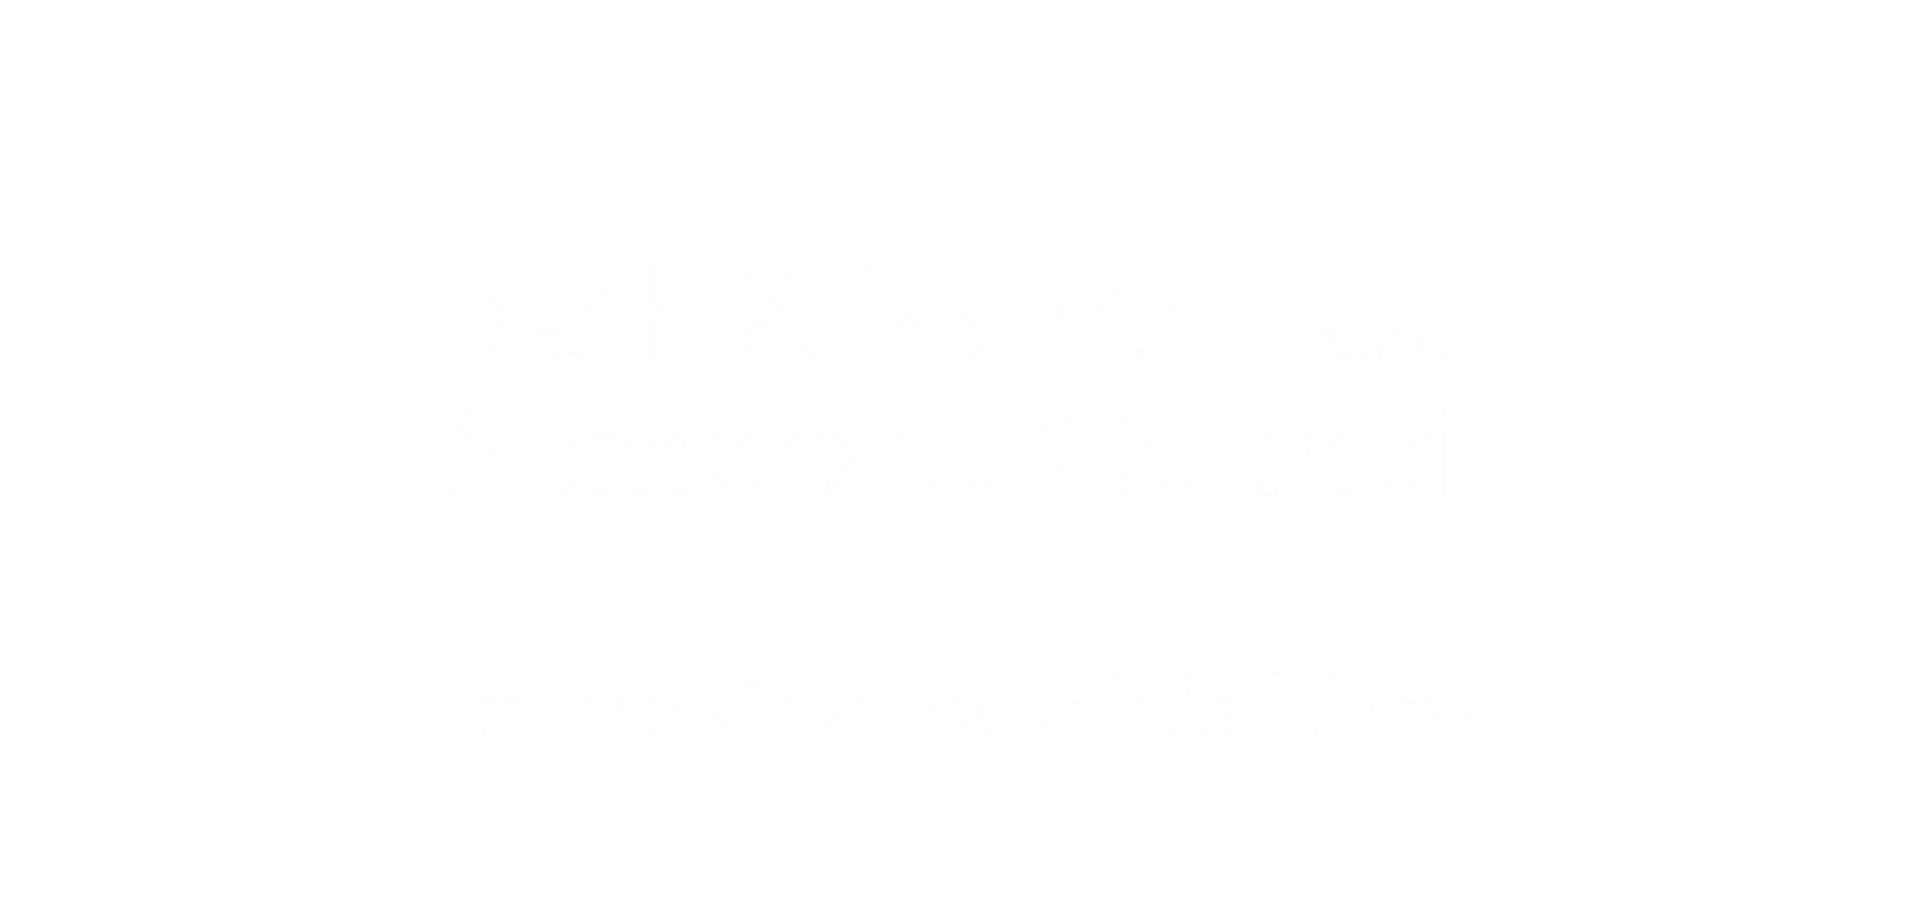 Bath & North East Somerset Council Case Study